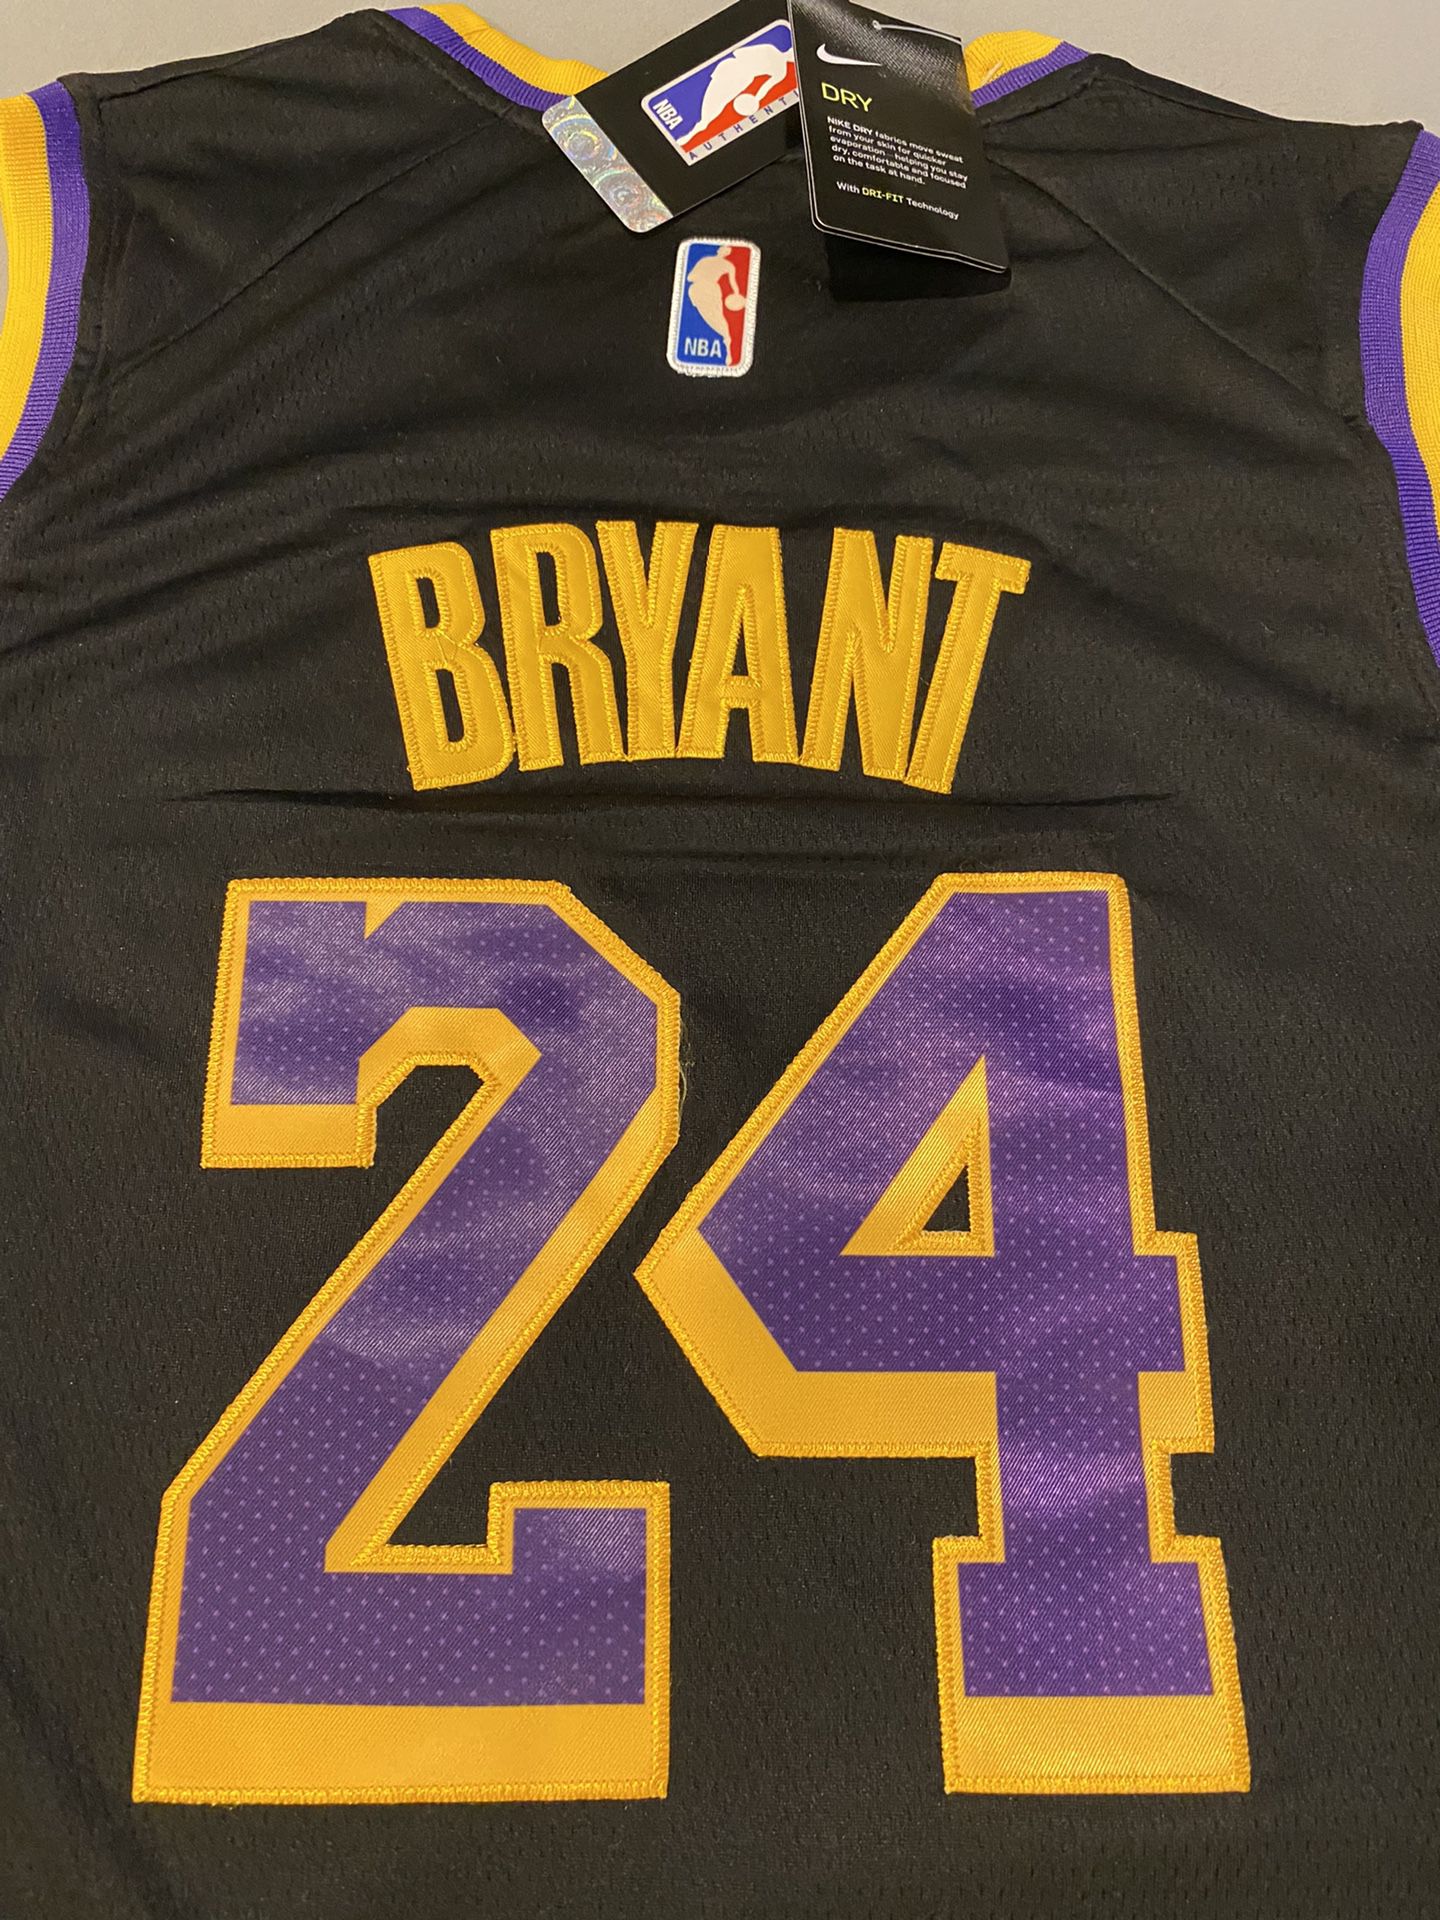 NBA Los Angeles Lakers Kobe Bryant Jersey for Sale in Irwindale